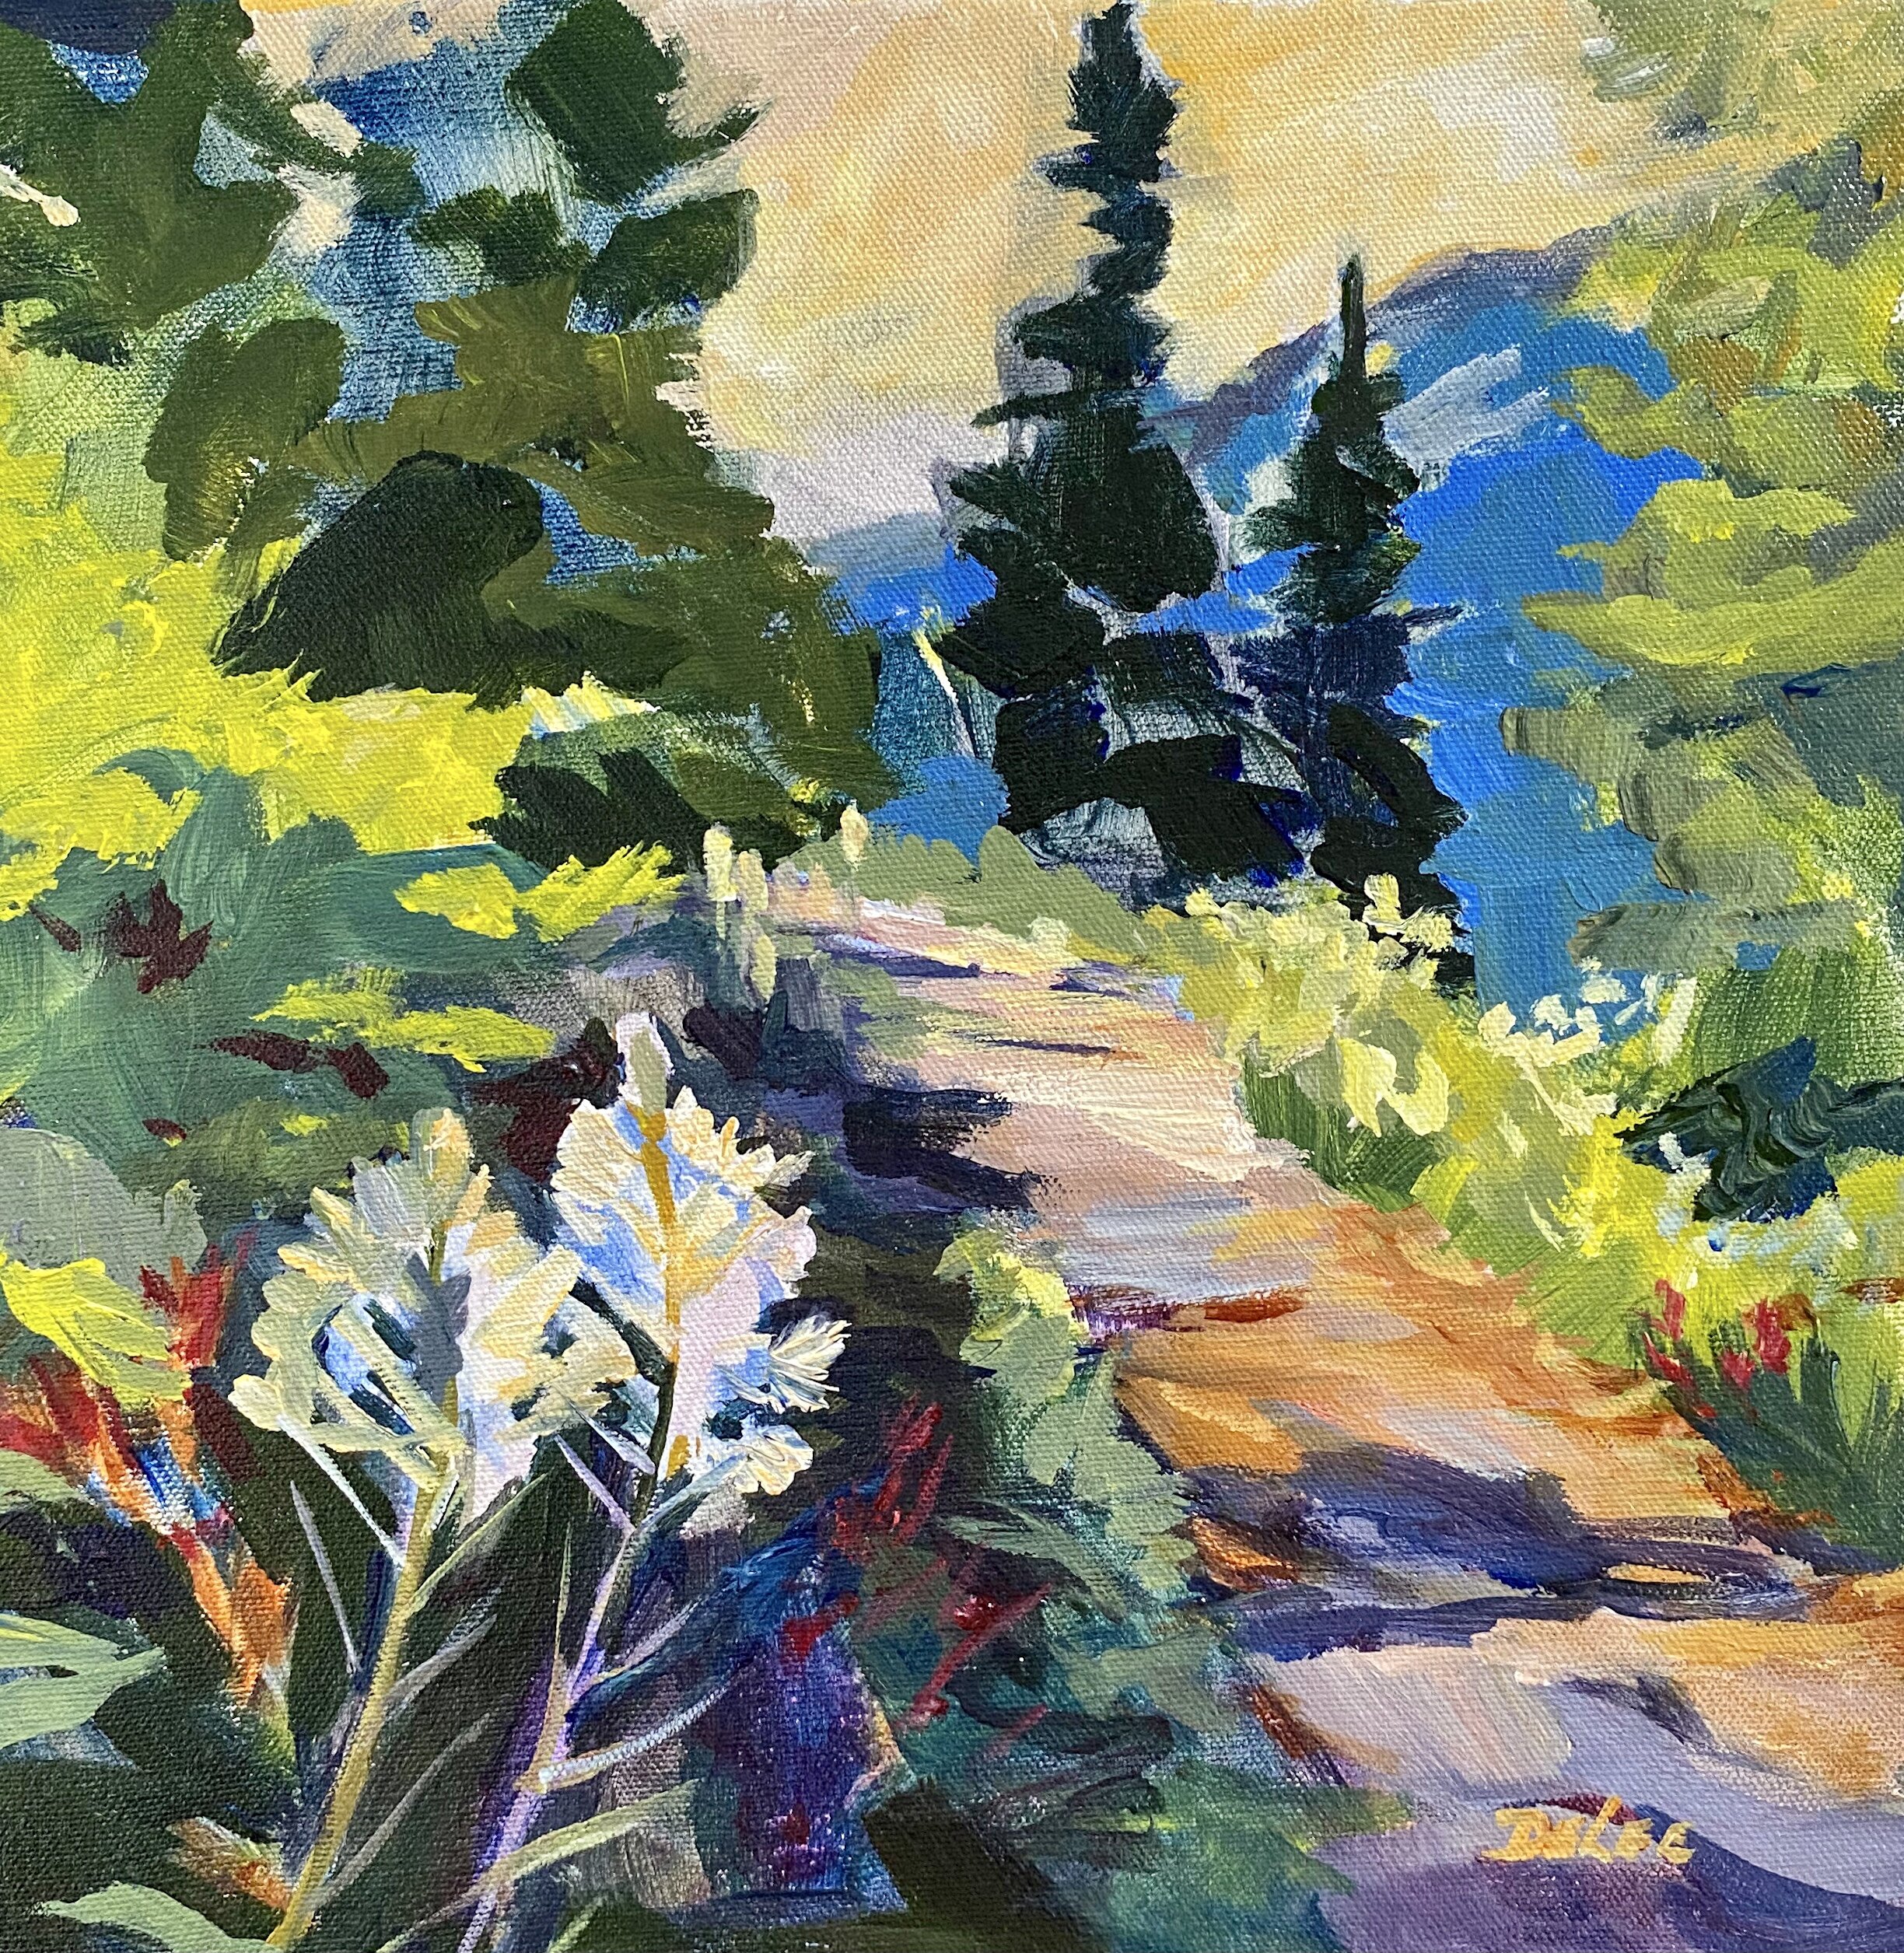 "PATH TO THE WILDFLOWERS", acrylic, 10x10 (floater frame)